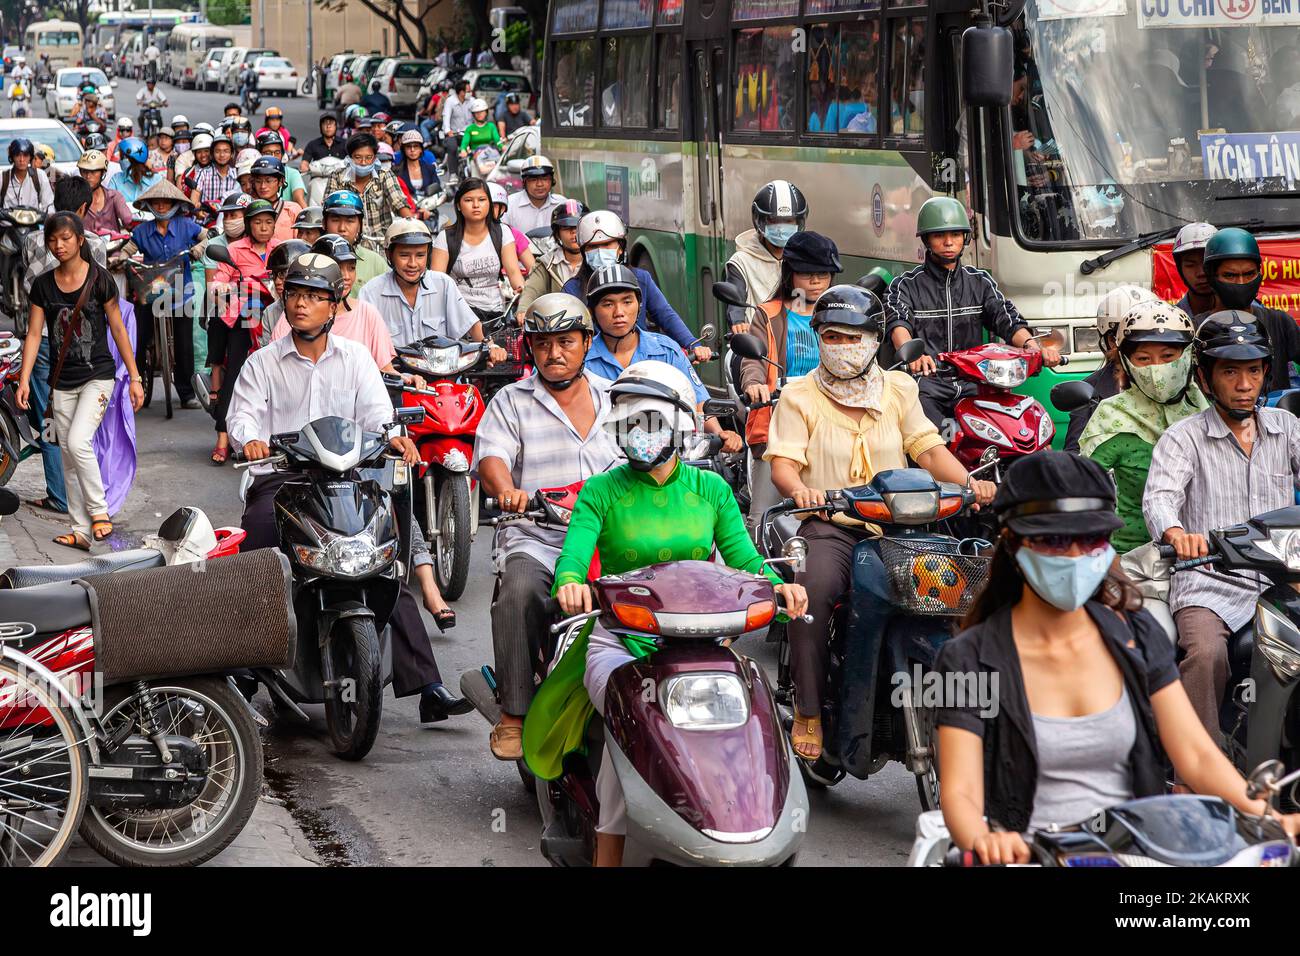 Motorcycle riders, traffic, and congestion, Ho Chi Minh City centre, Vietnam Stock Photo